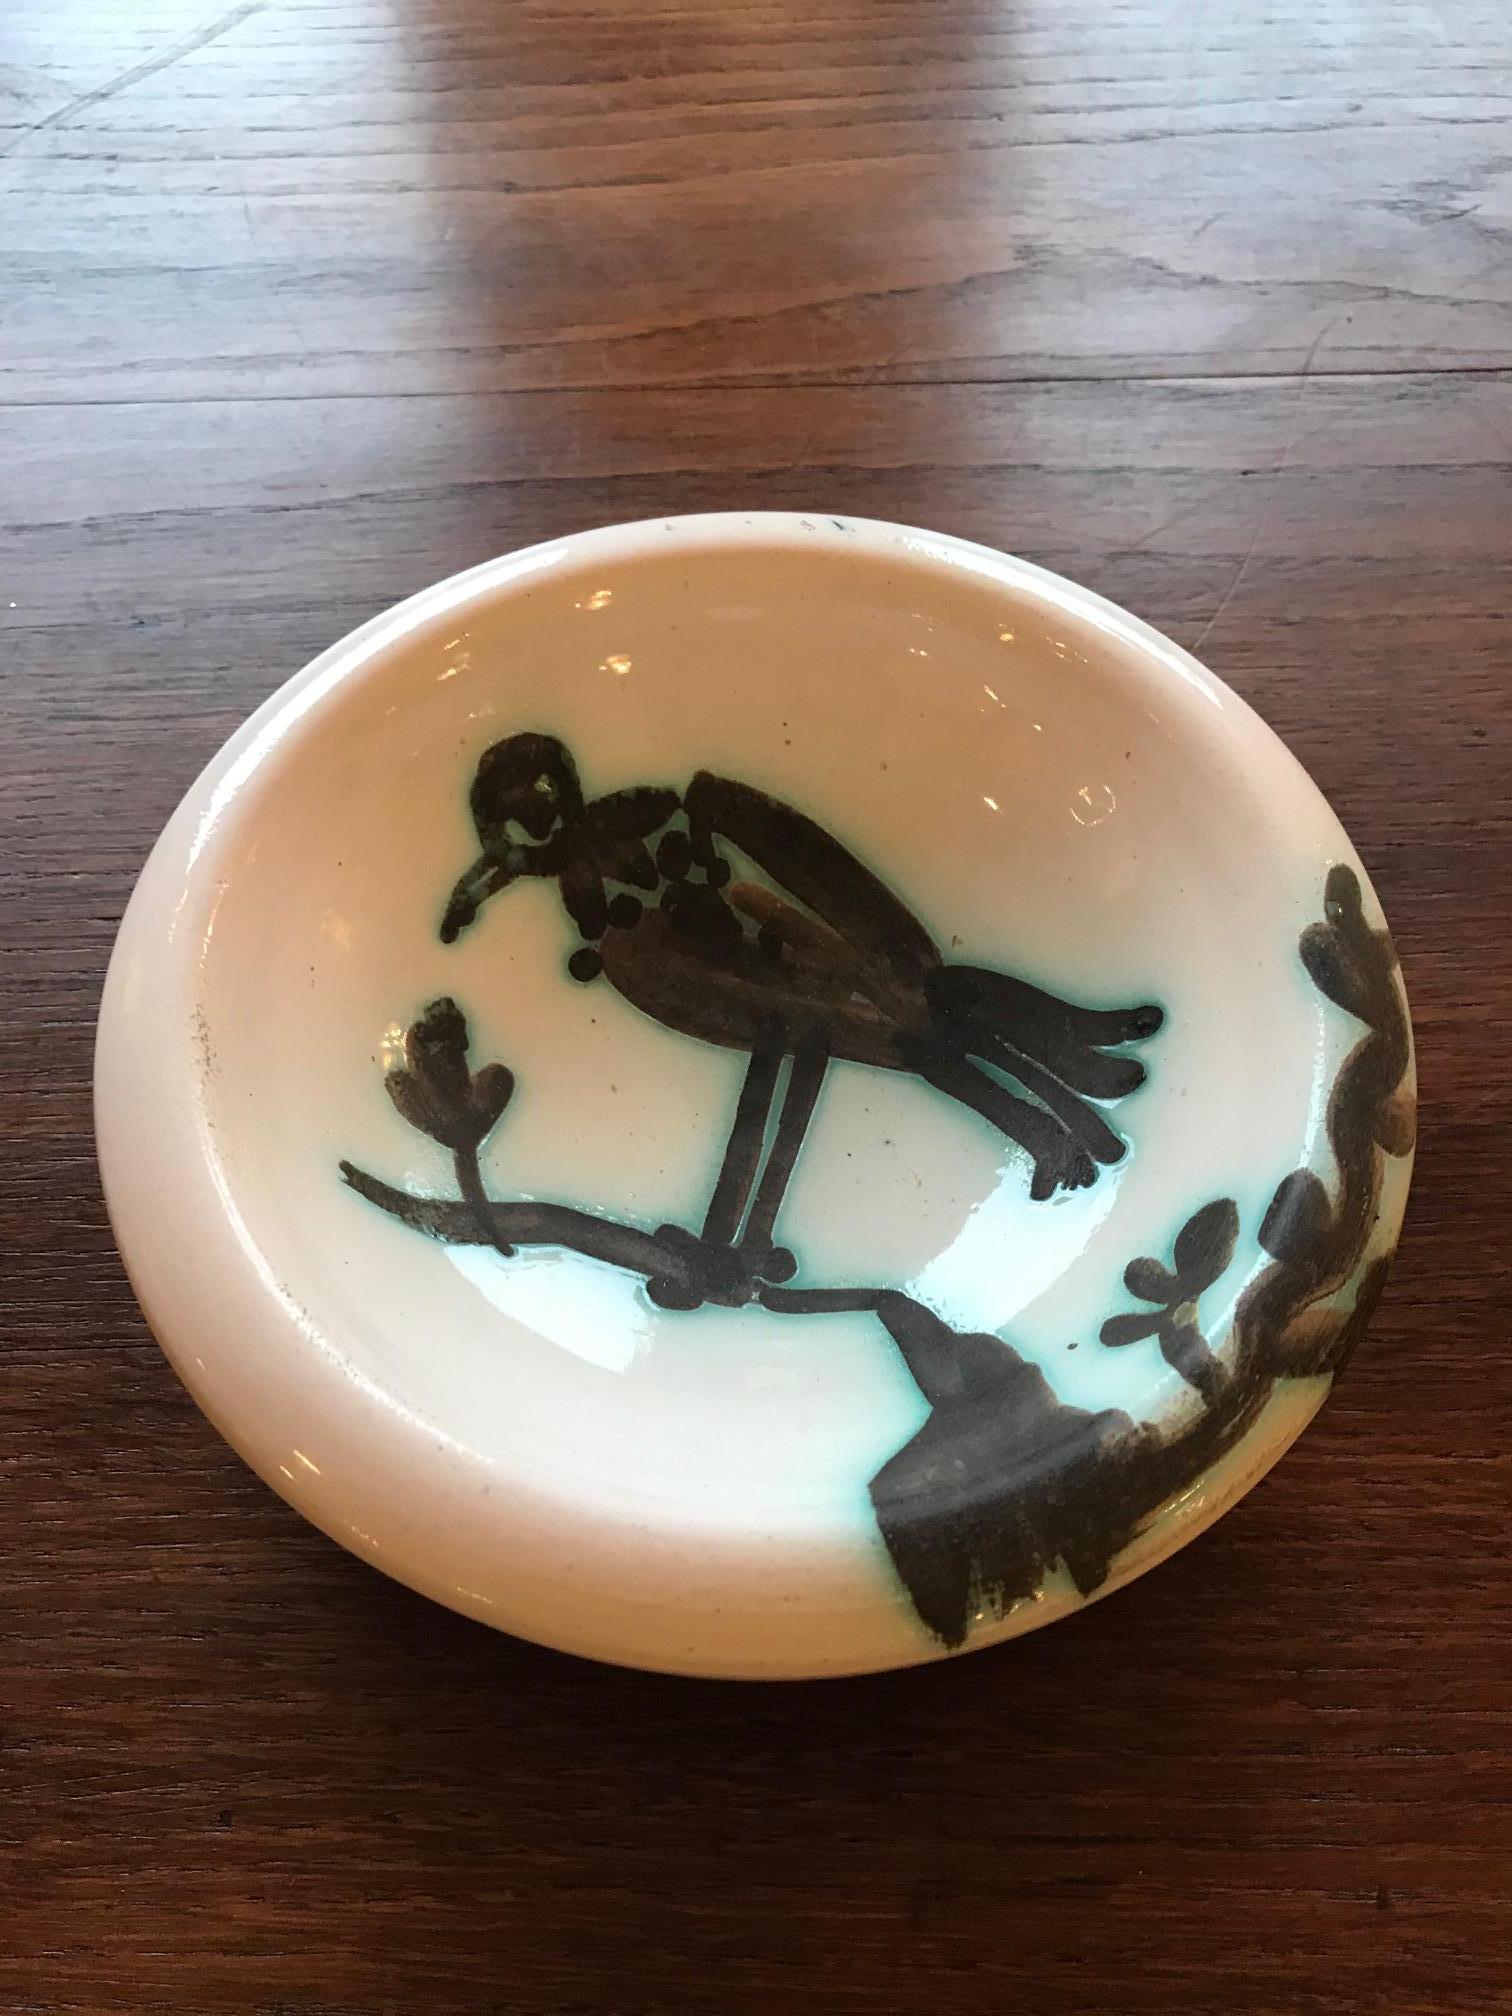 Very nice 20th century white Earthenware Picasso ashtray from the 1950s representing a bird on a branch. Decorated with oxidized paraffin. White enamel. Black decor.
Edition of 500 copies.
Picasso Edition Stamp at the back.
Bibliography: Ramié n